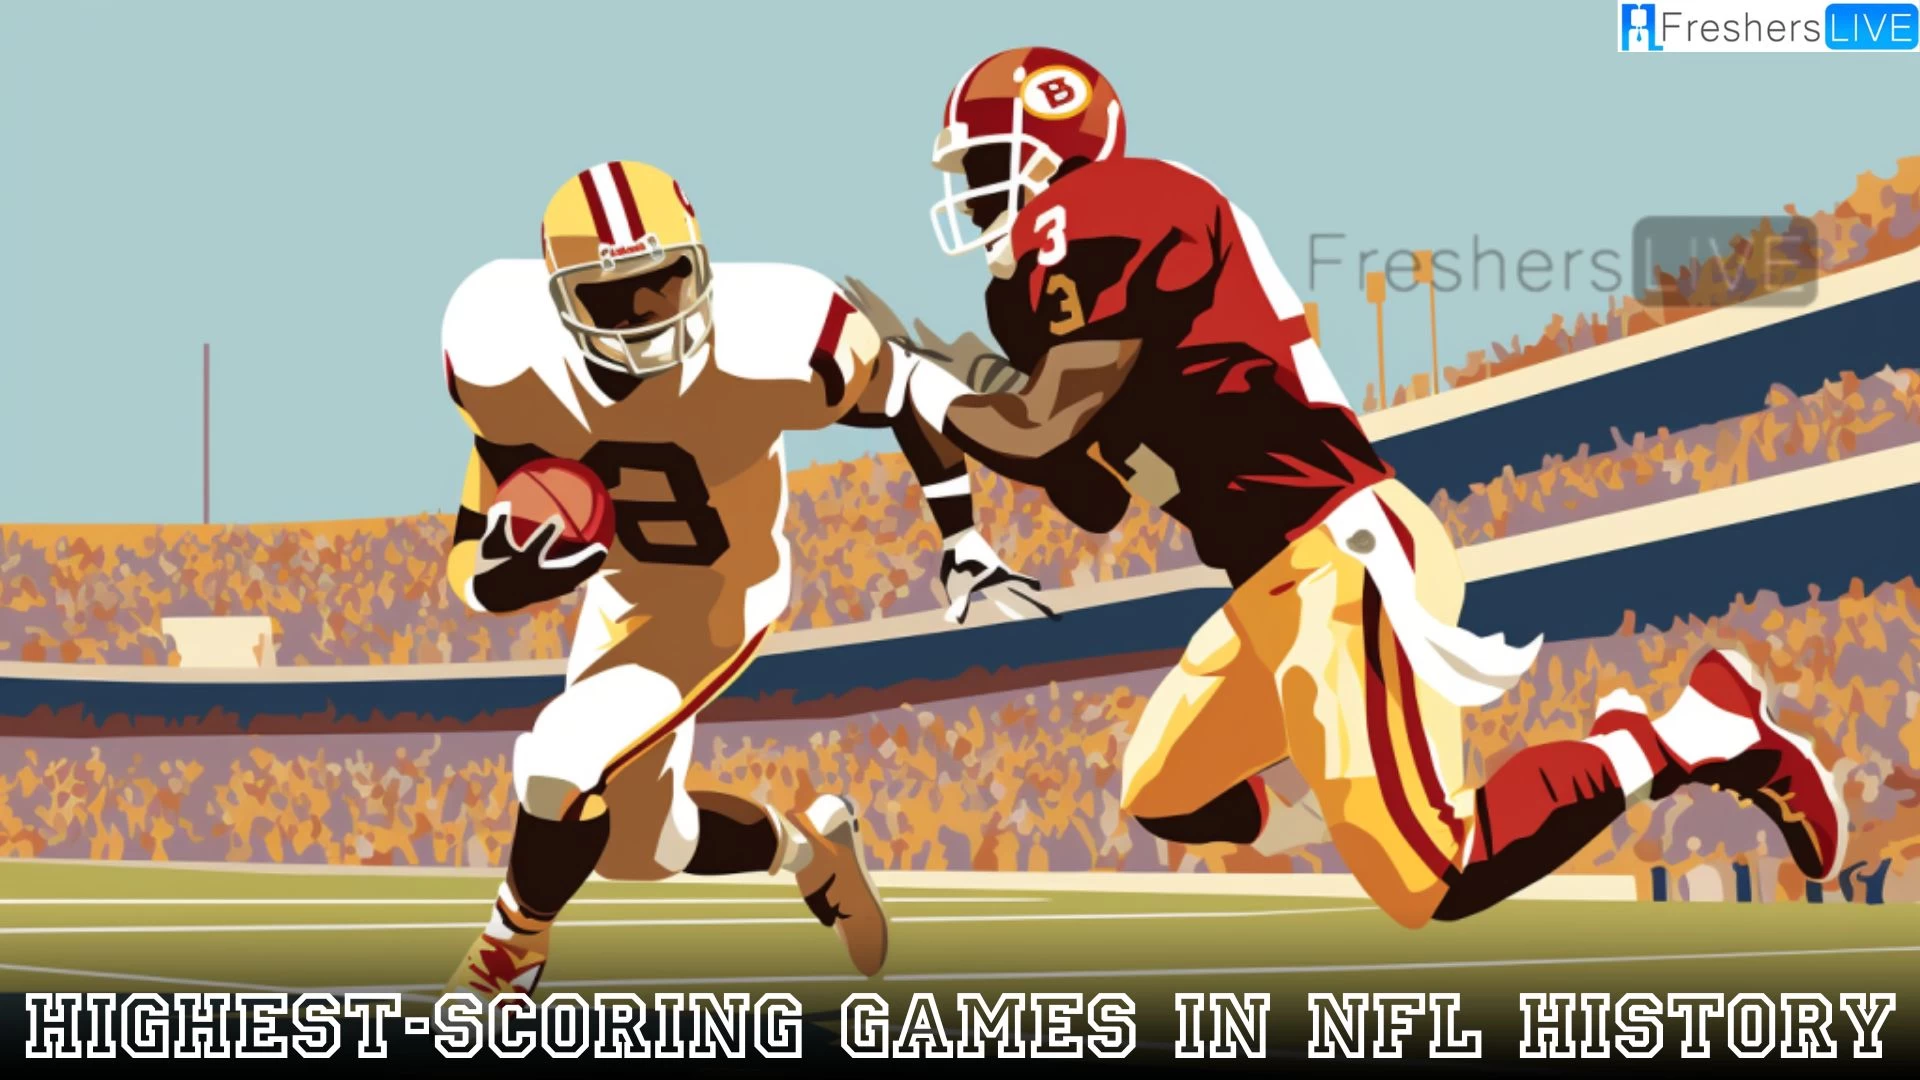 Highest-Scoring Games in NFL History - Top 10 Records and Thrills